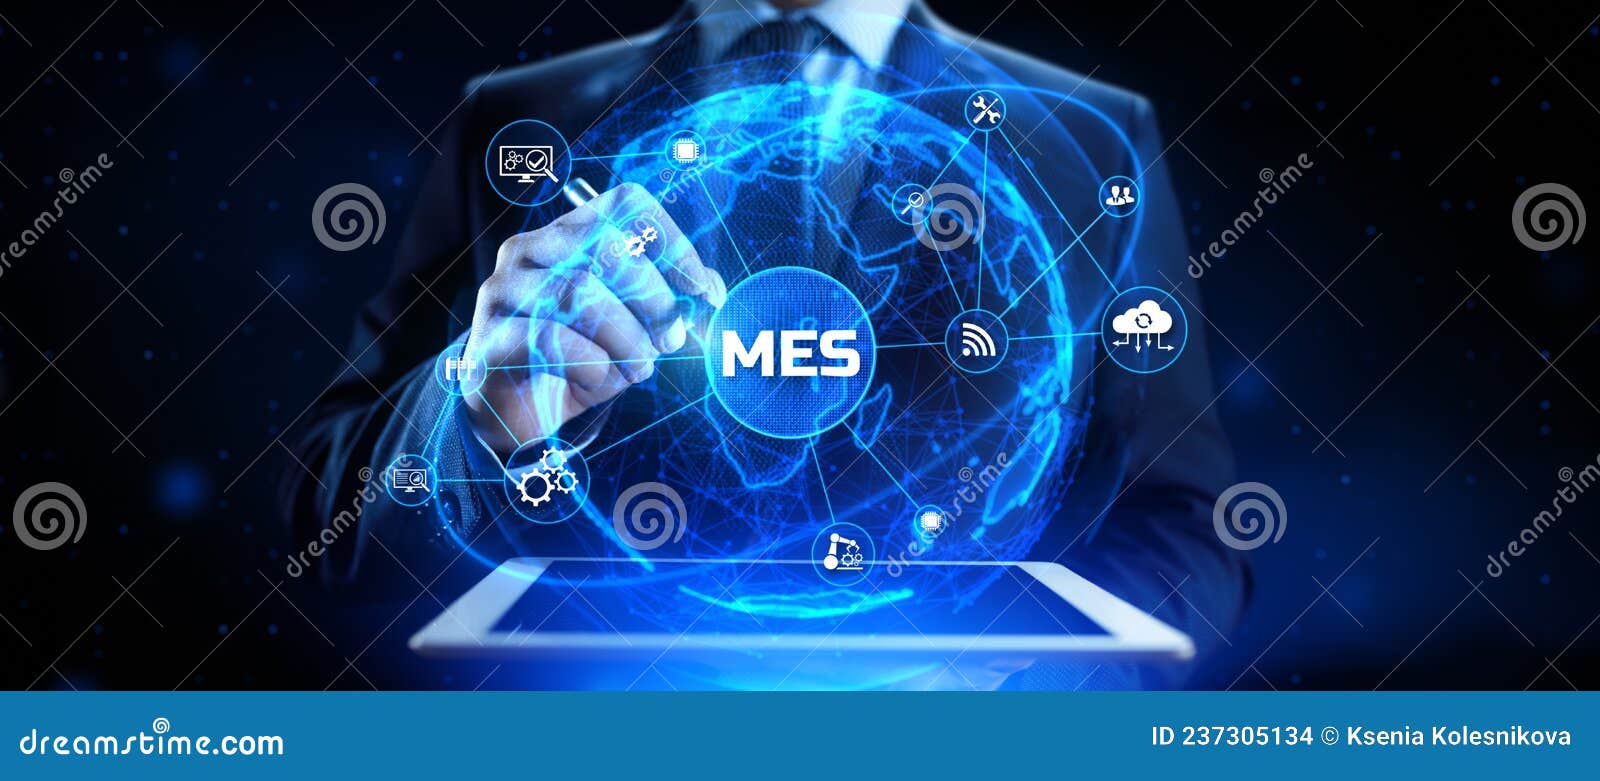 mes manufacturing execution system technology concept on virtual screen